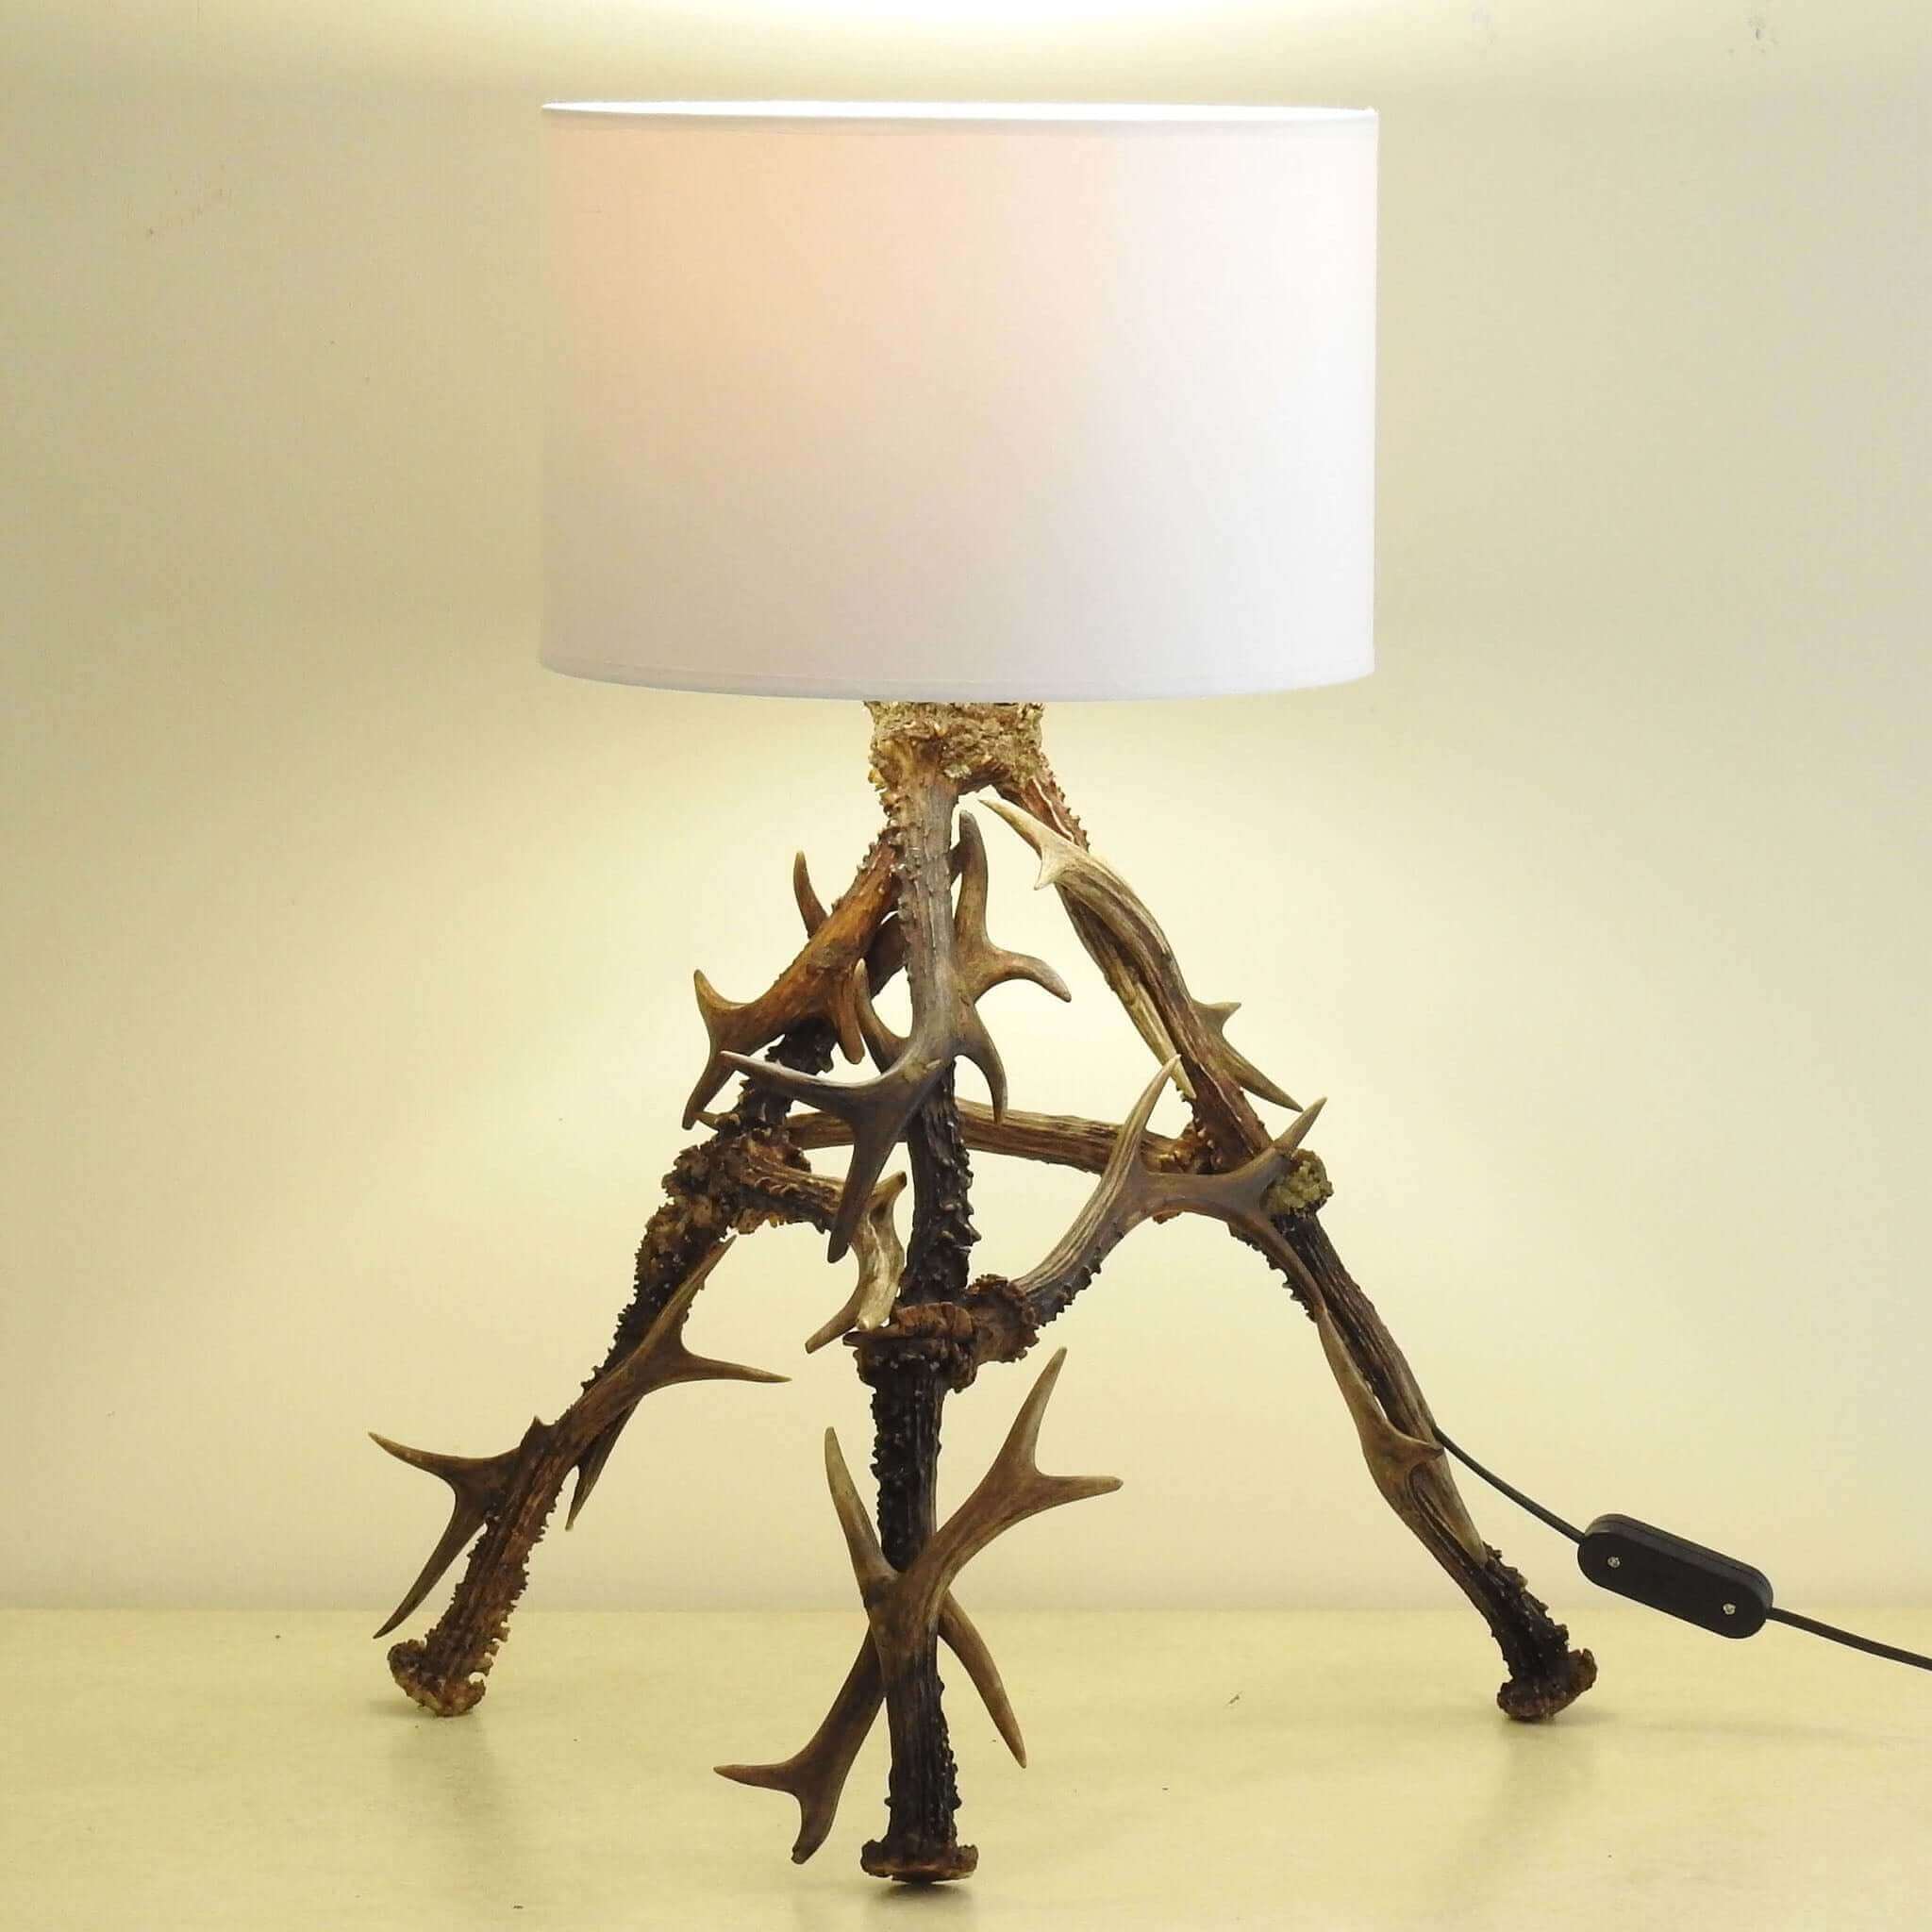 Antler lamp with shade.